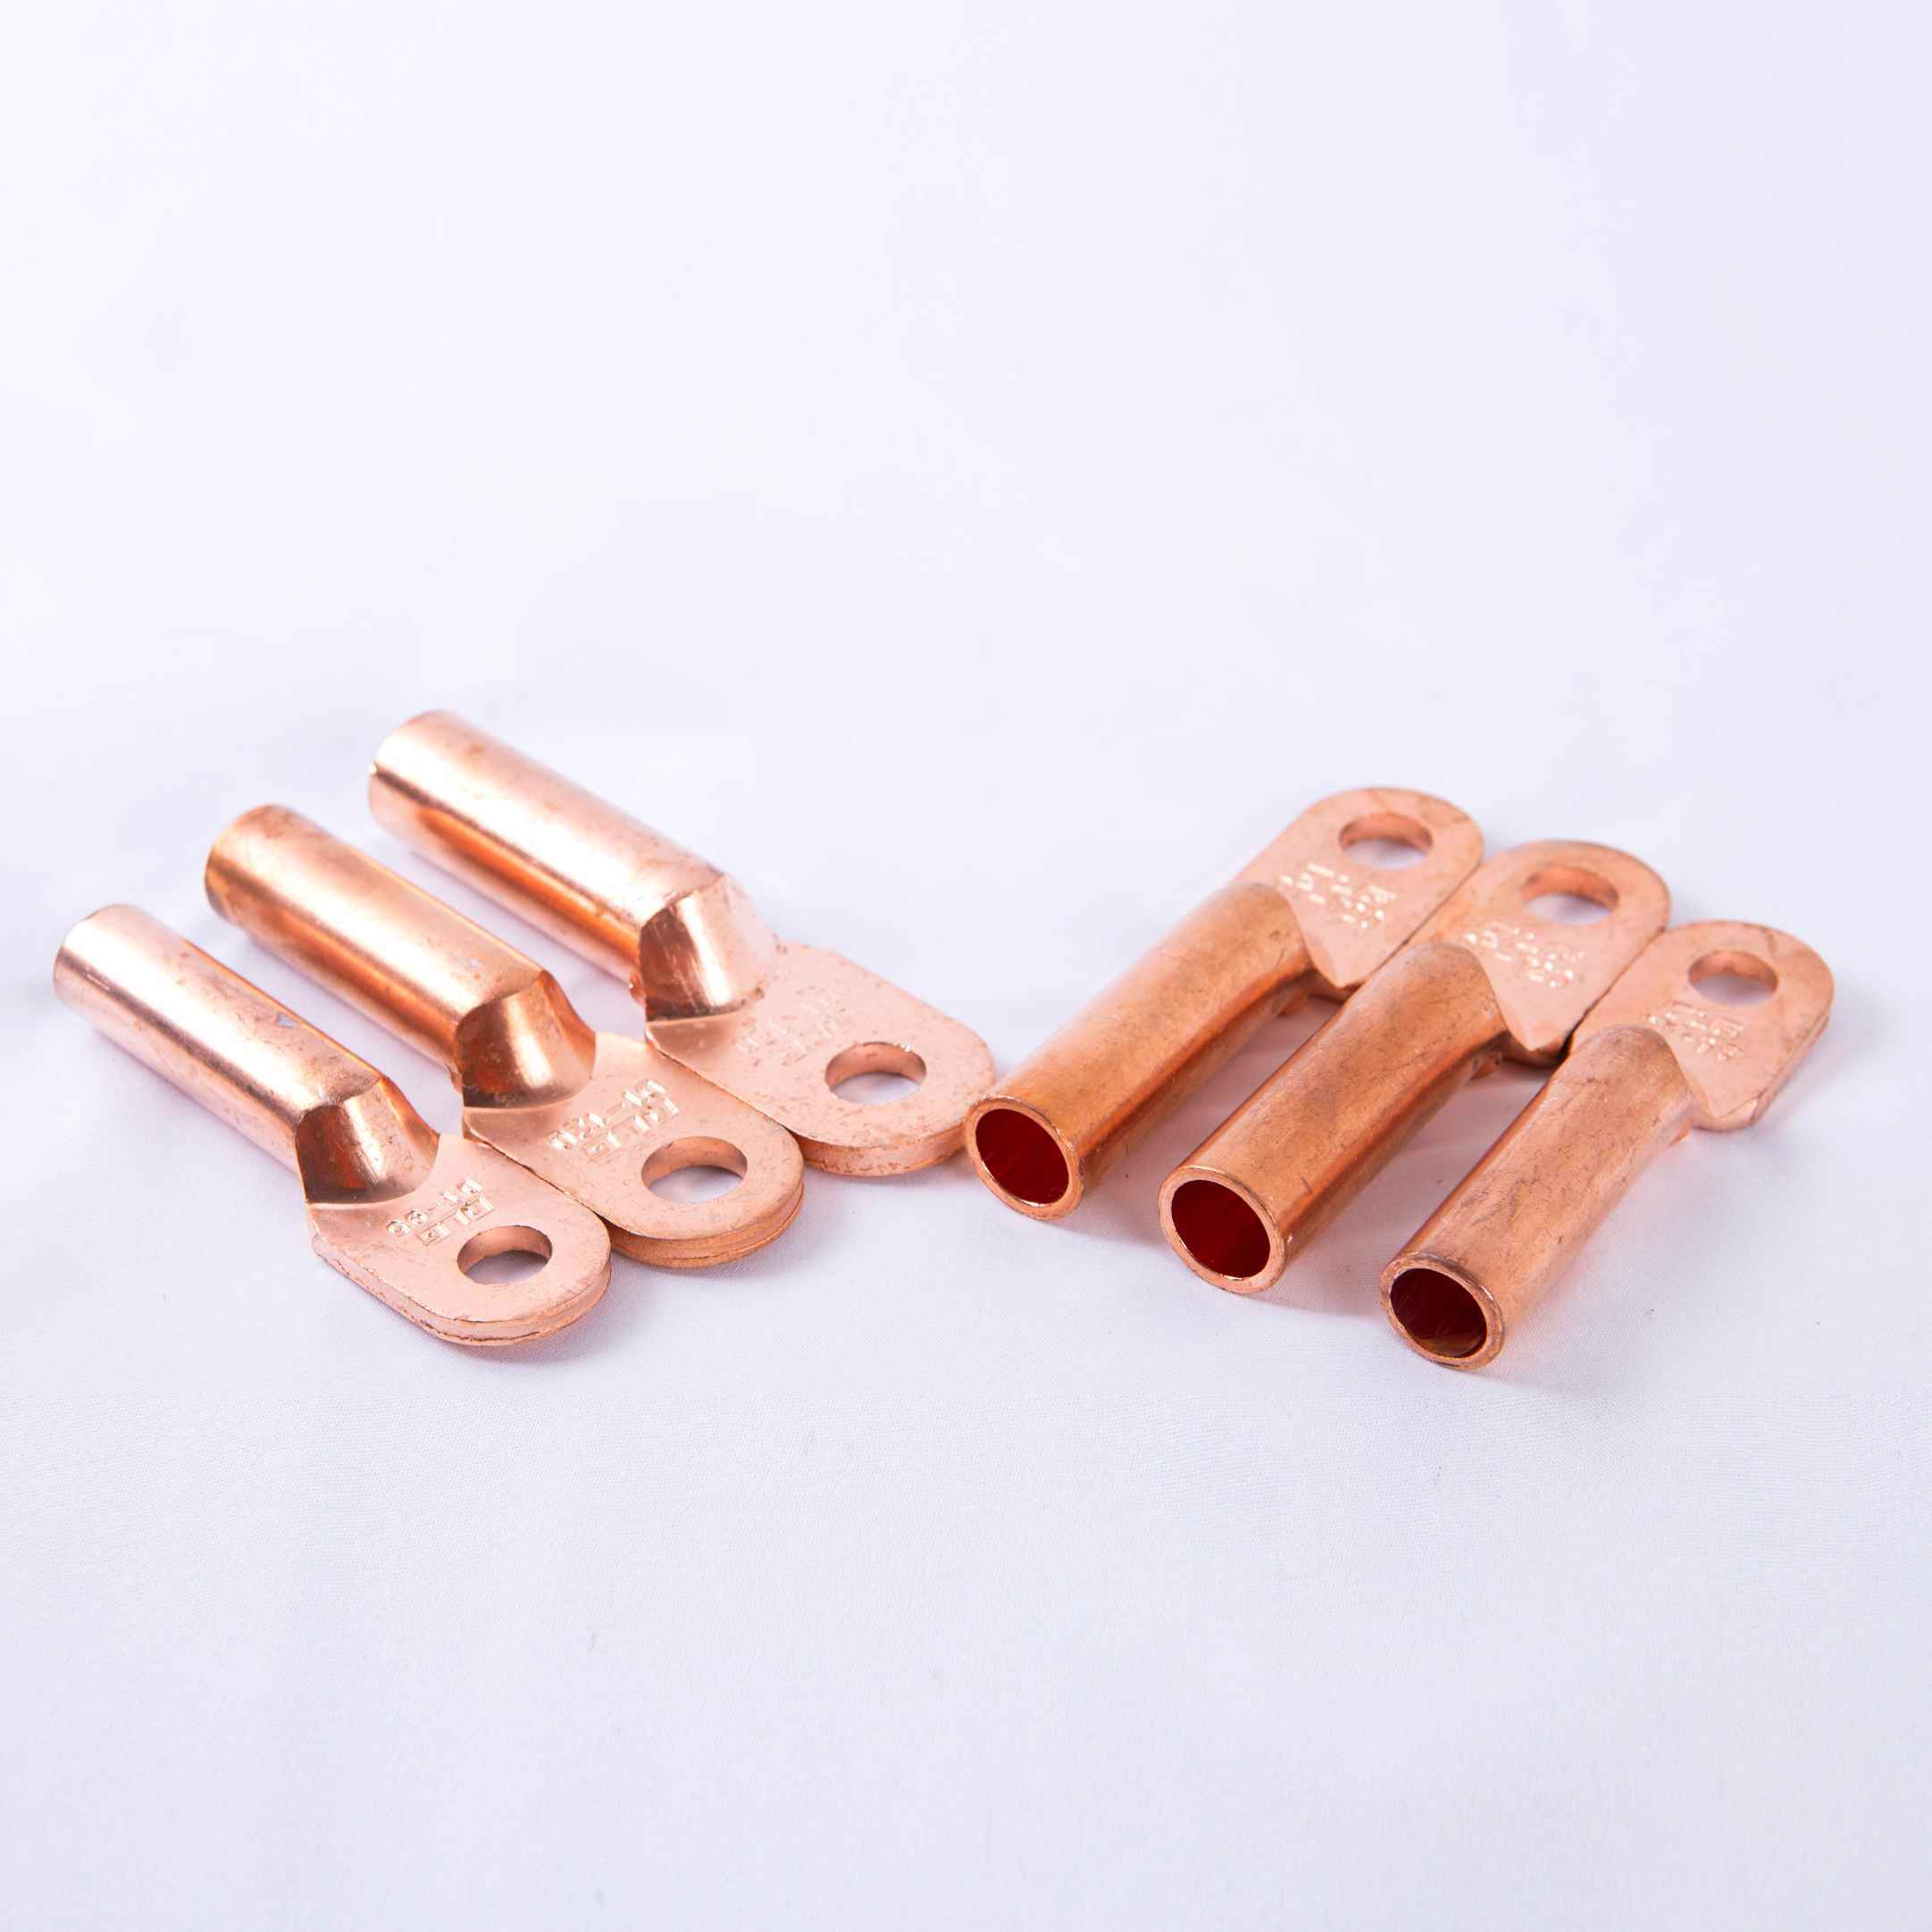 Dt-240 Power Cable Copper Wire Ears Copper Nose